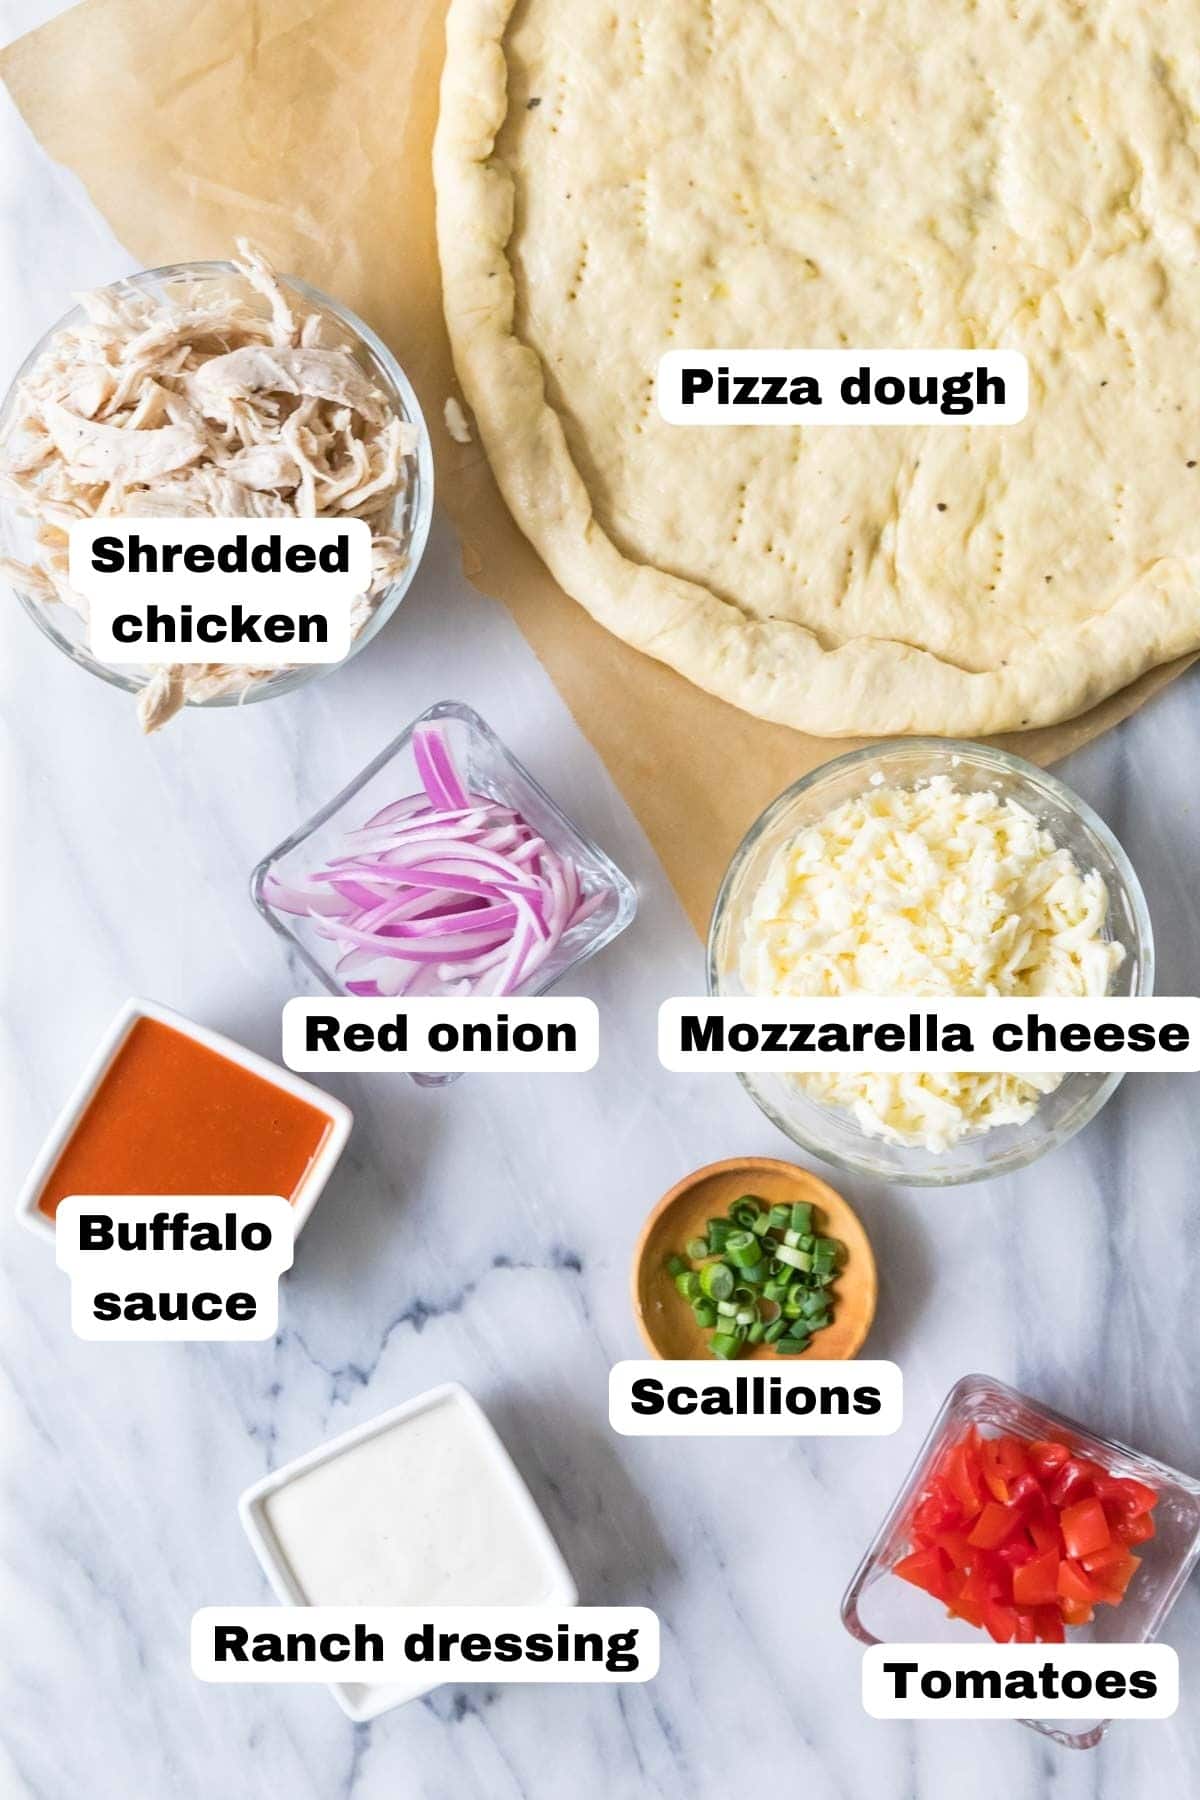 Overhead view of labelled ingredients including pizza dough, chicken, buffalo sauce, and more.